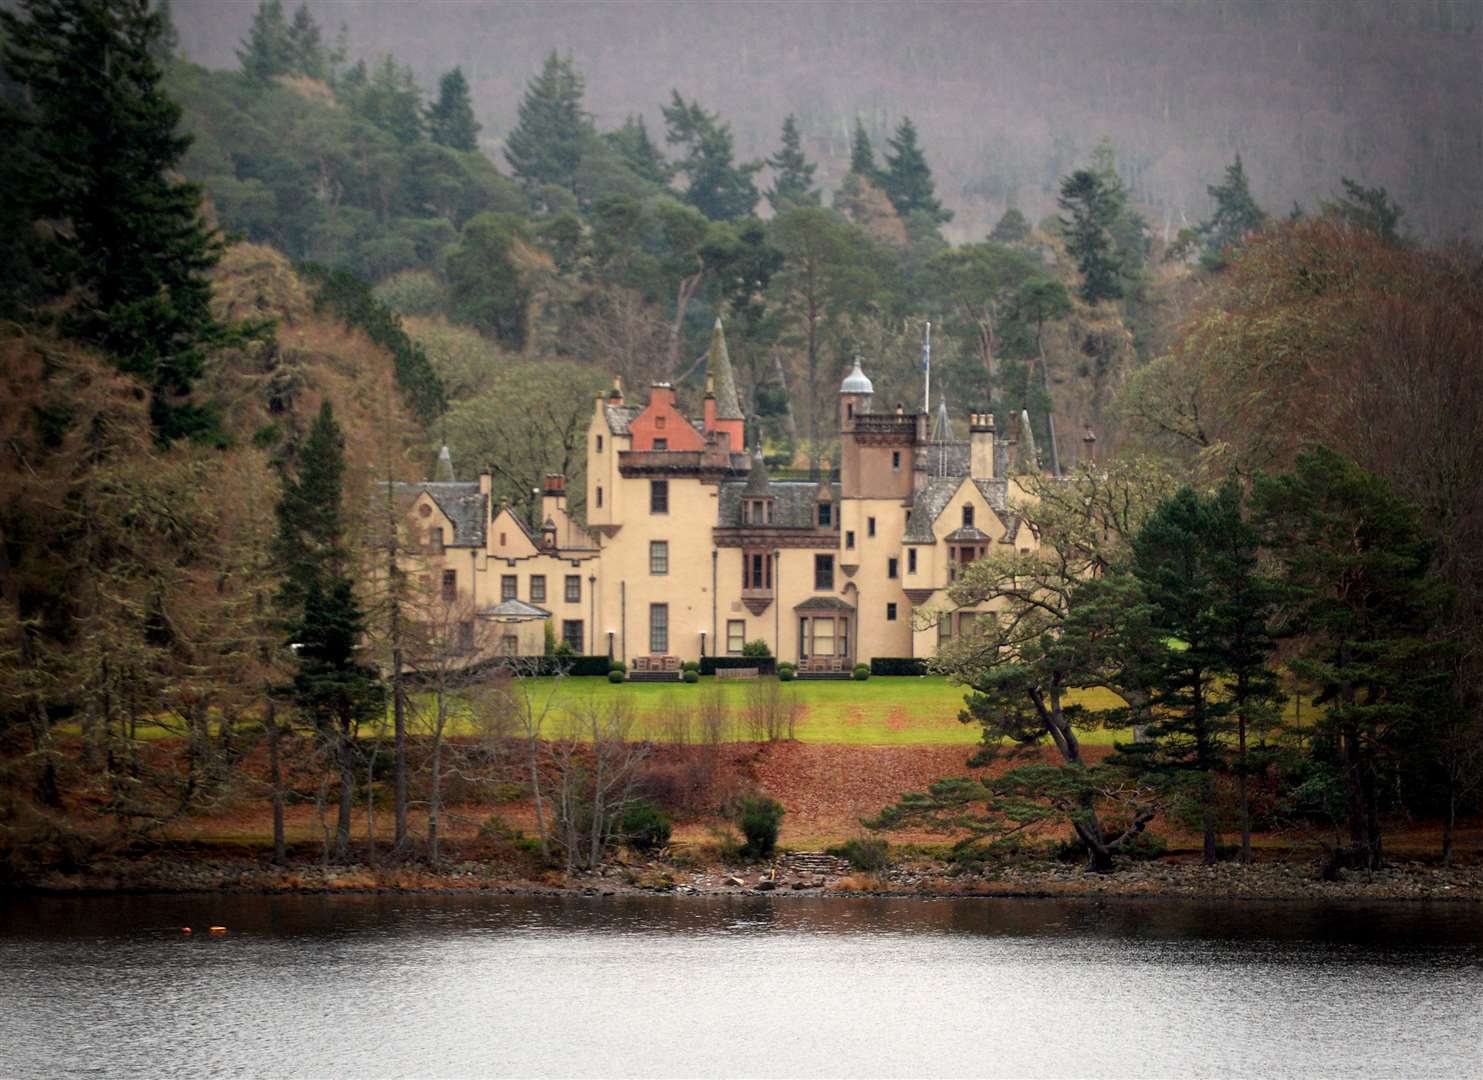 Aldourie Castle will be available to guests willing to pay up to £60,000 a week.